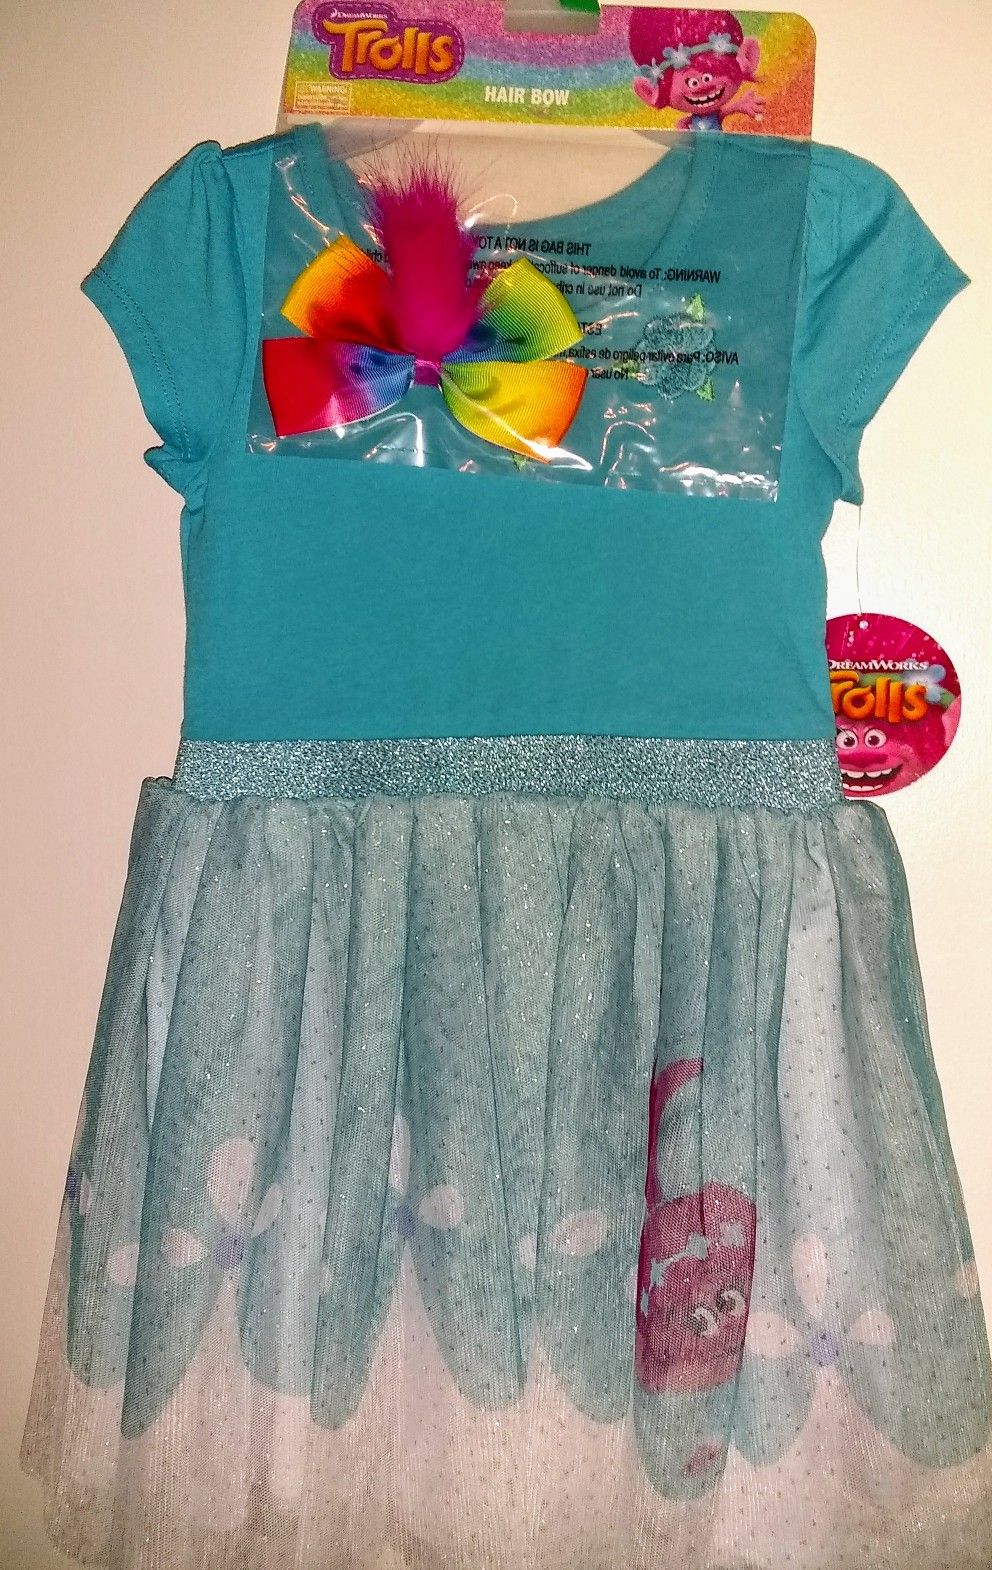 New Trolls Dress Up Dress 5t, Minnie Mouse Dress Up 5t & Dollie and Me Dress 6. 3 toddler girl dresses for $19